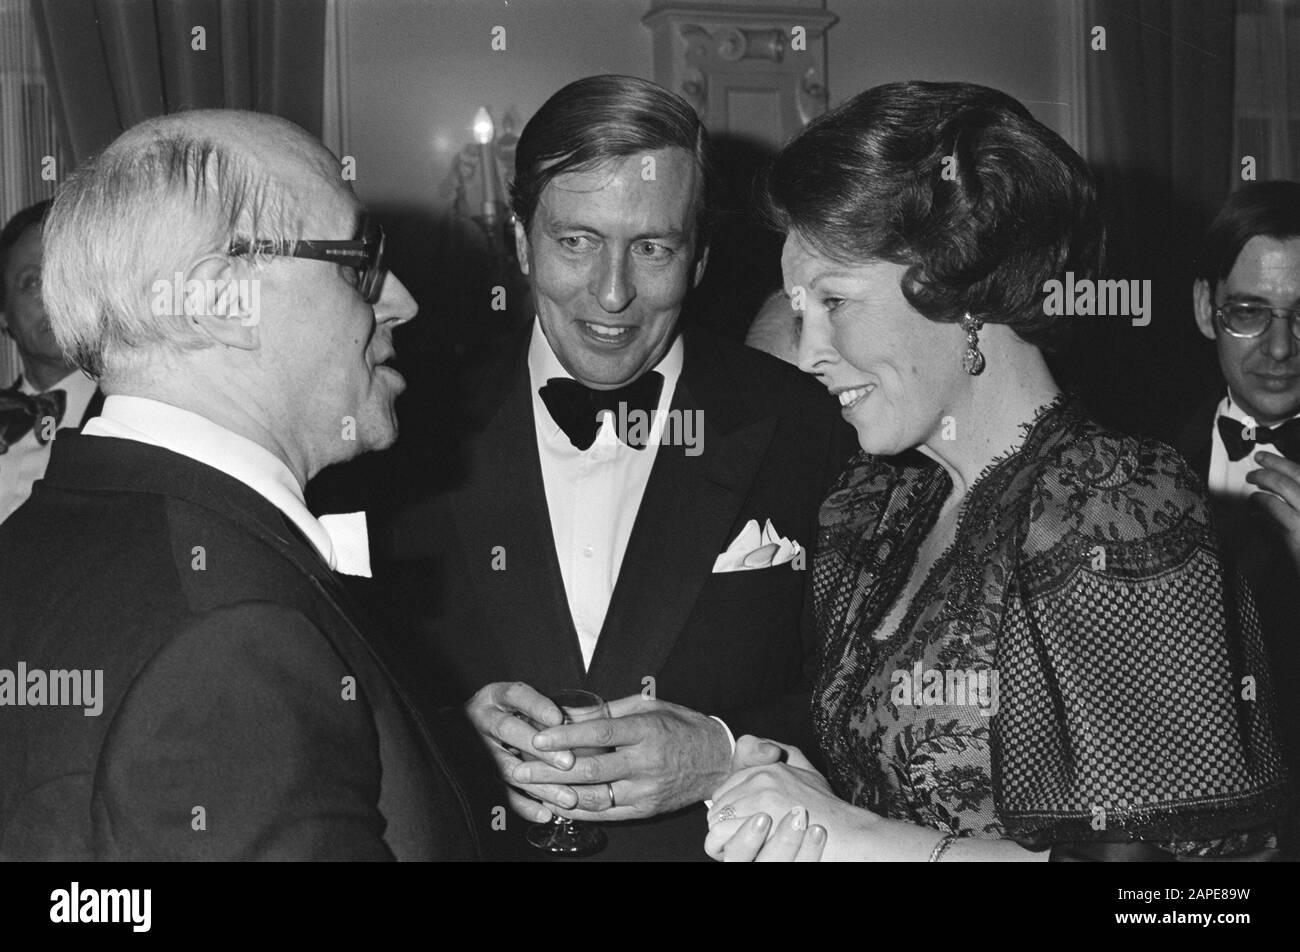 Beatrix and Claus at Bicentennial Concert at by National Symphony Orchestra of Washington DC in Concertgebouw Rostropovich Date: February 18, 1982 Keywords: concerts, conductors Personal name: Beatrix, princess, Bicentennial, Claus, prince Stock Photo